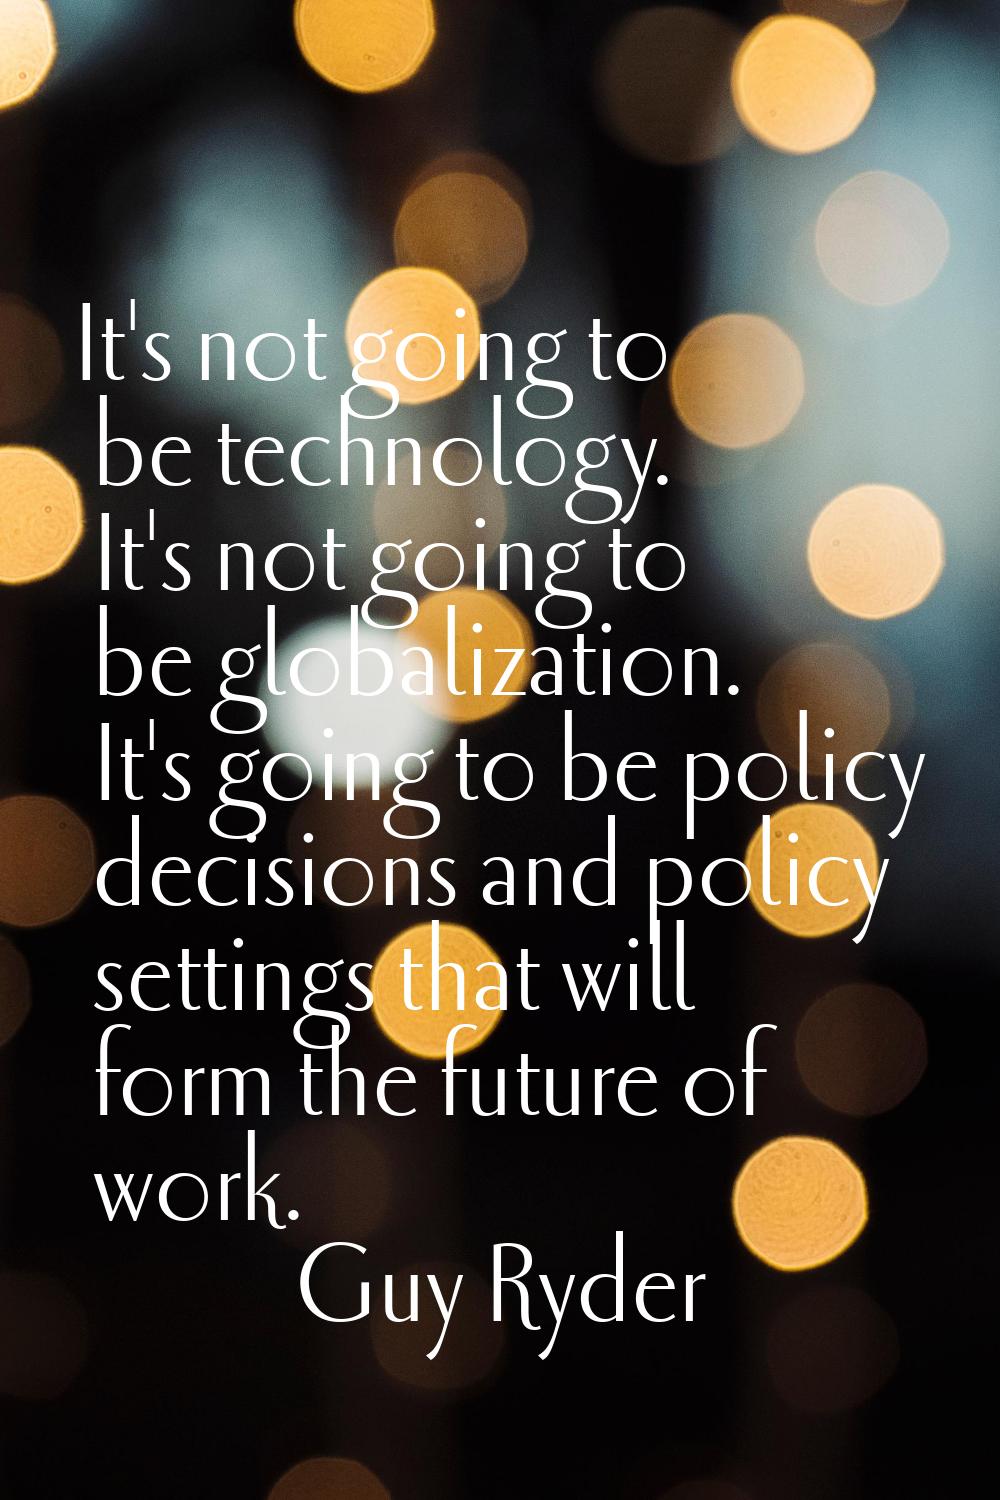 It's not going to be technology. It's not going to be globalization. It's going to be policy decisi